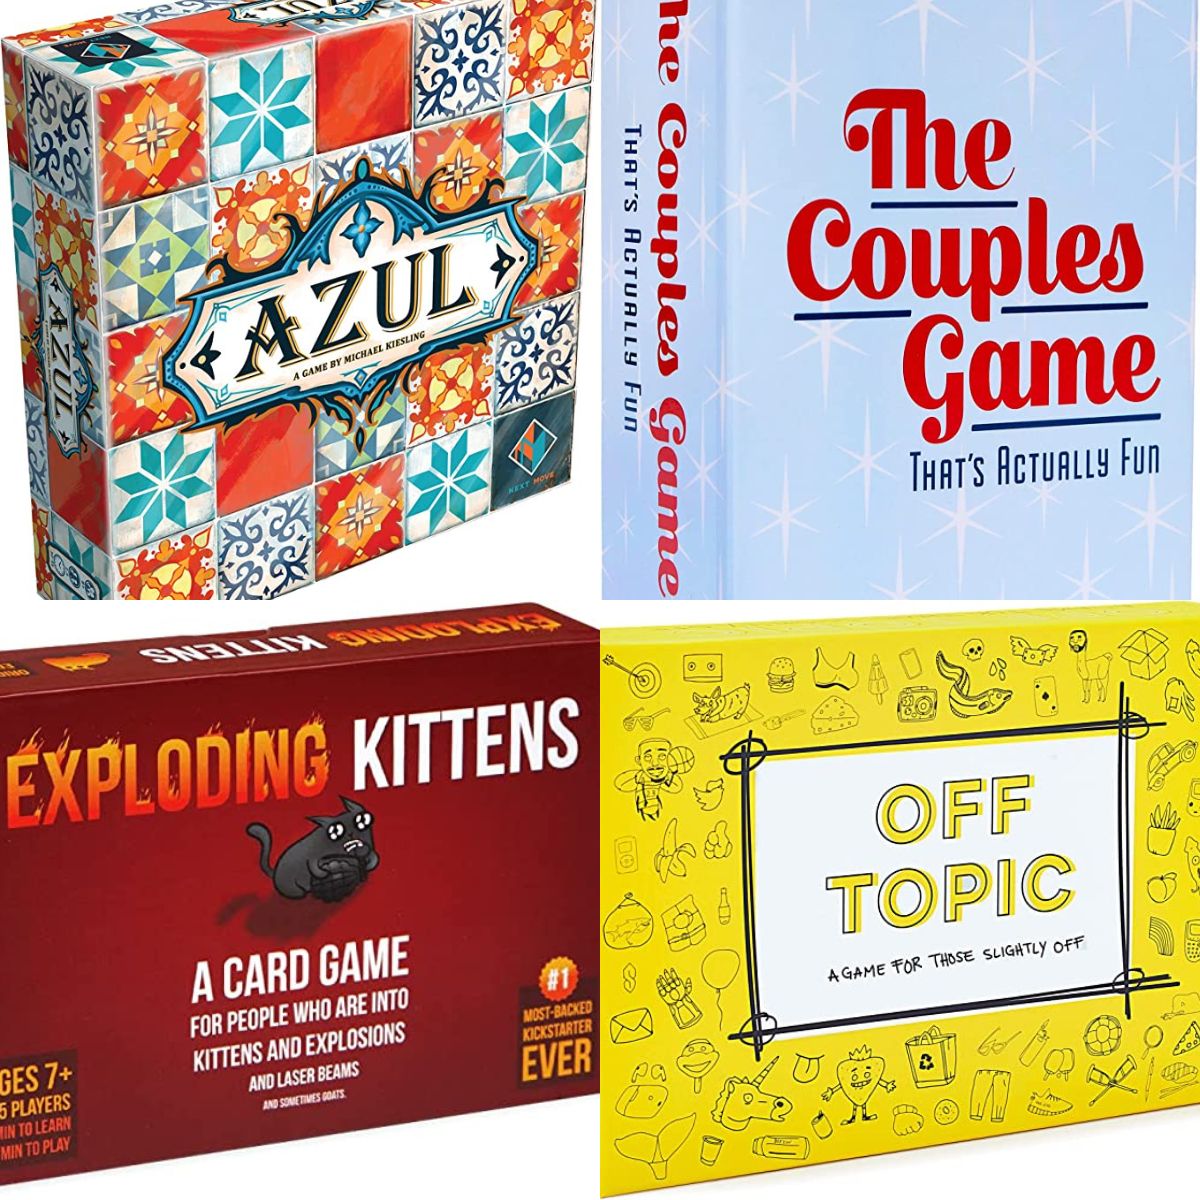 Come Play Bellz With Us! #boardgames #gamenight #couple #fun, Boardgames